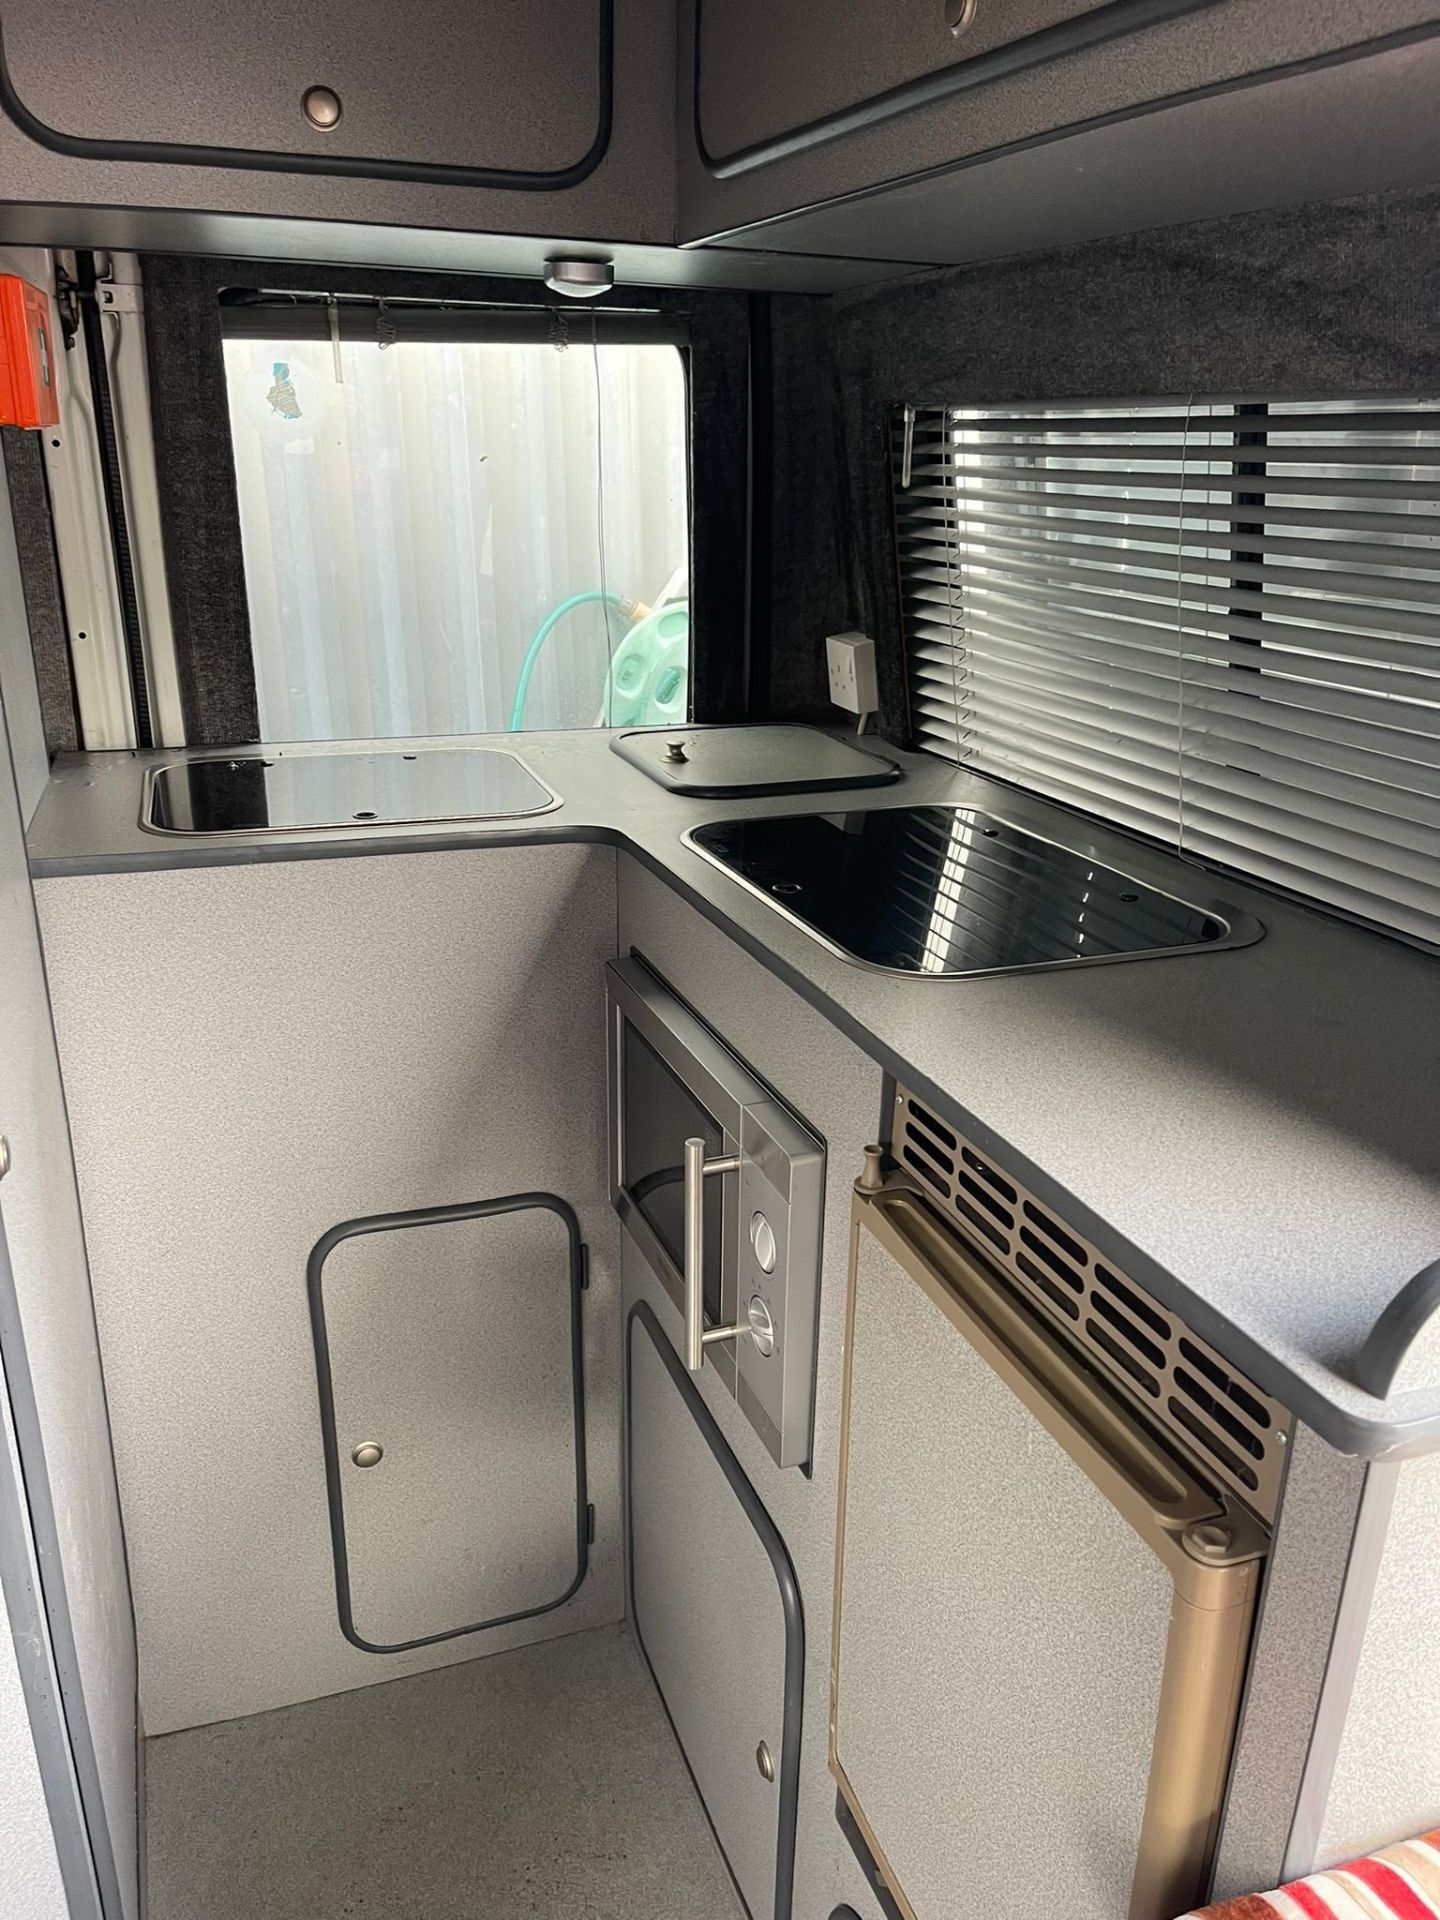 Aztec Camper on Citroen Relay cassis. - Image 20 of 61